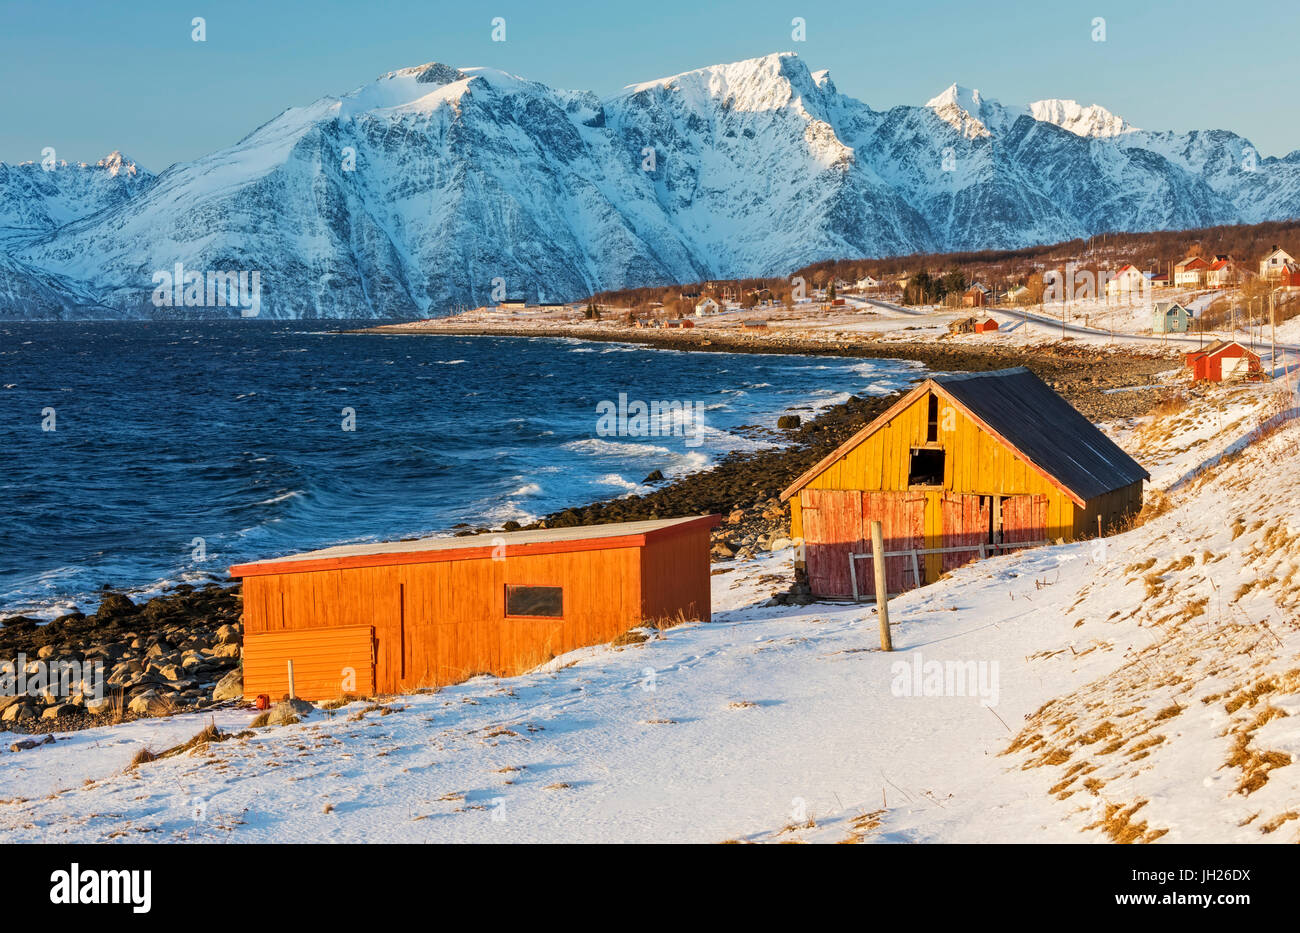 Typical wooden huts called Rorbu surrounded by waves of the cold sea and snowy peaks, Djupvik, Lyngen Alps, Troms, Norway Stock Photo